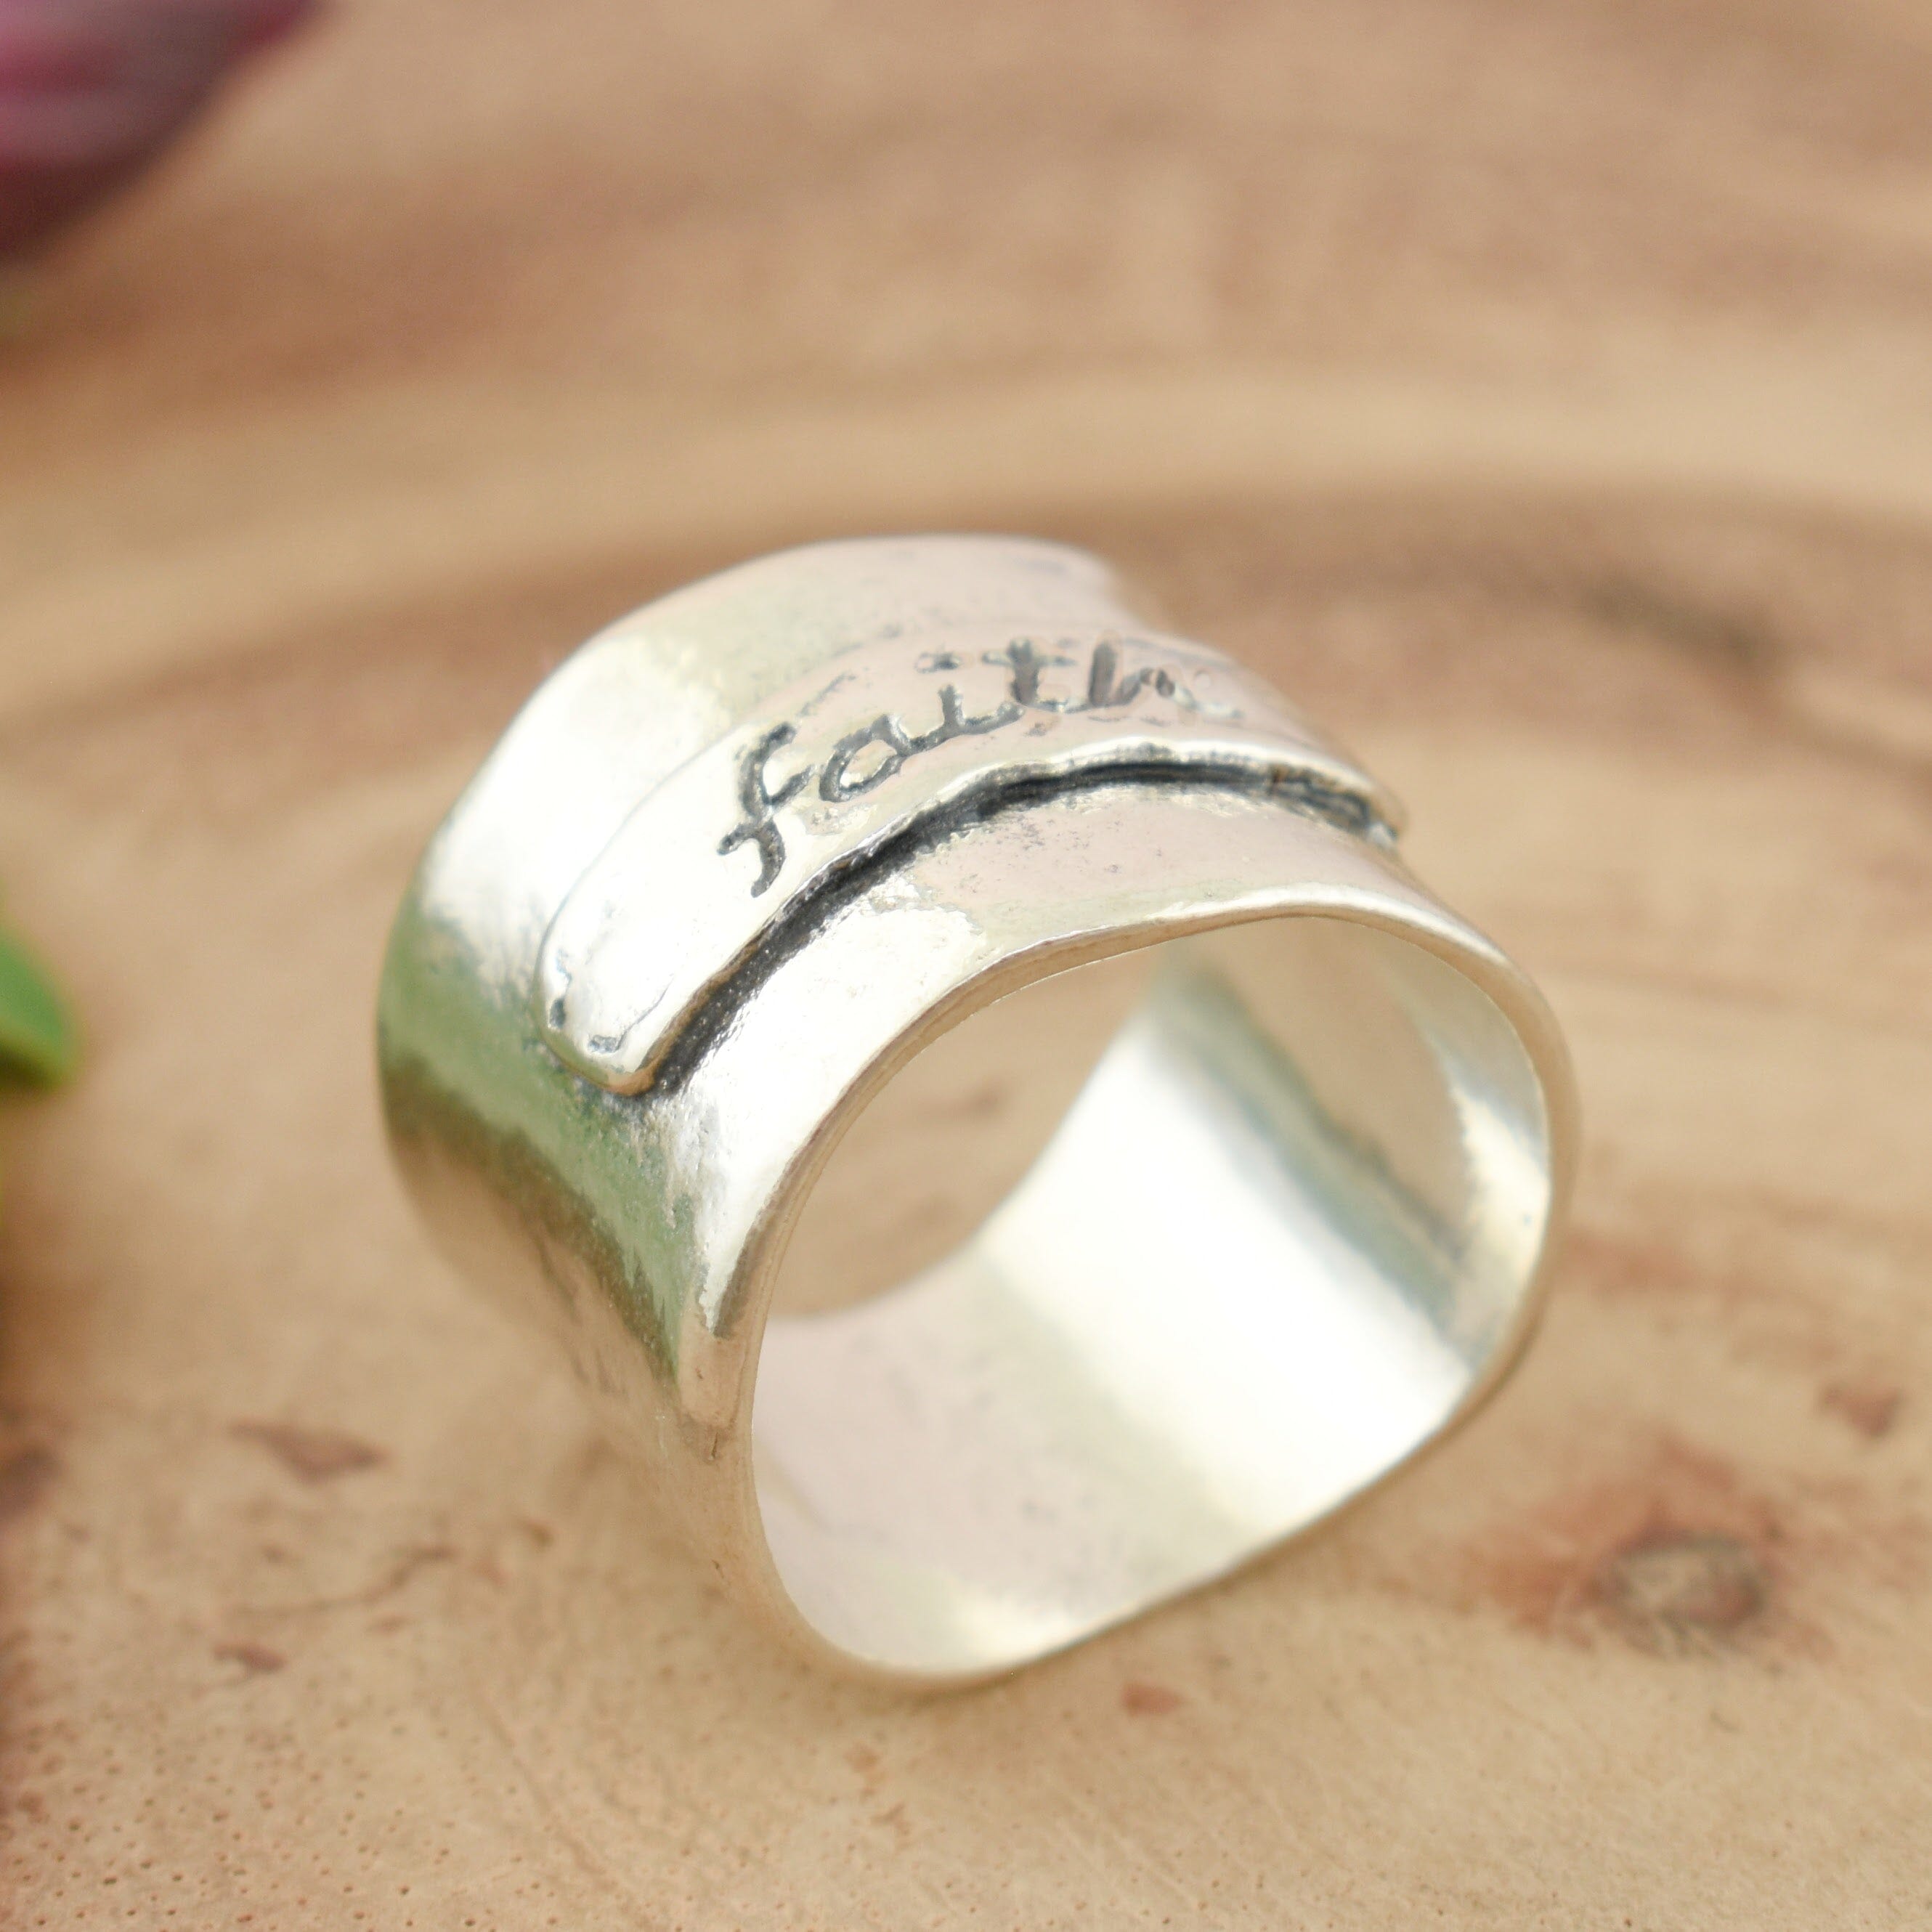 Christian sterling silver ring engraved with word FAITH